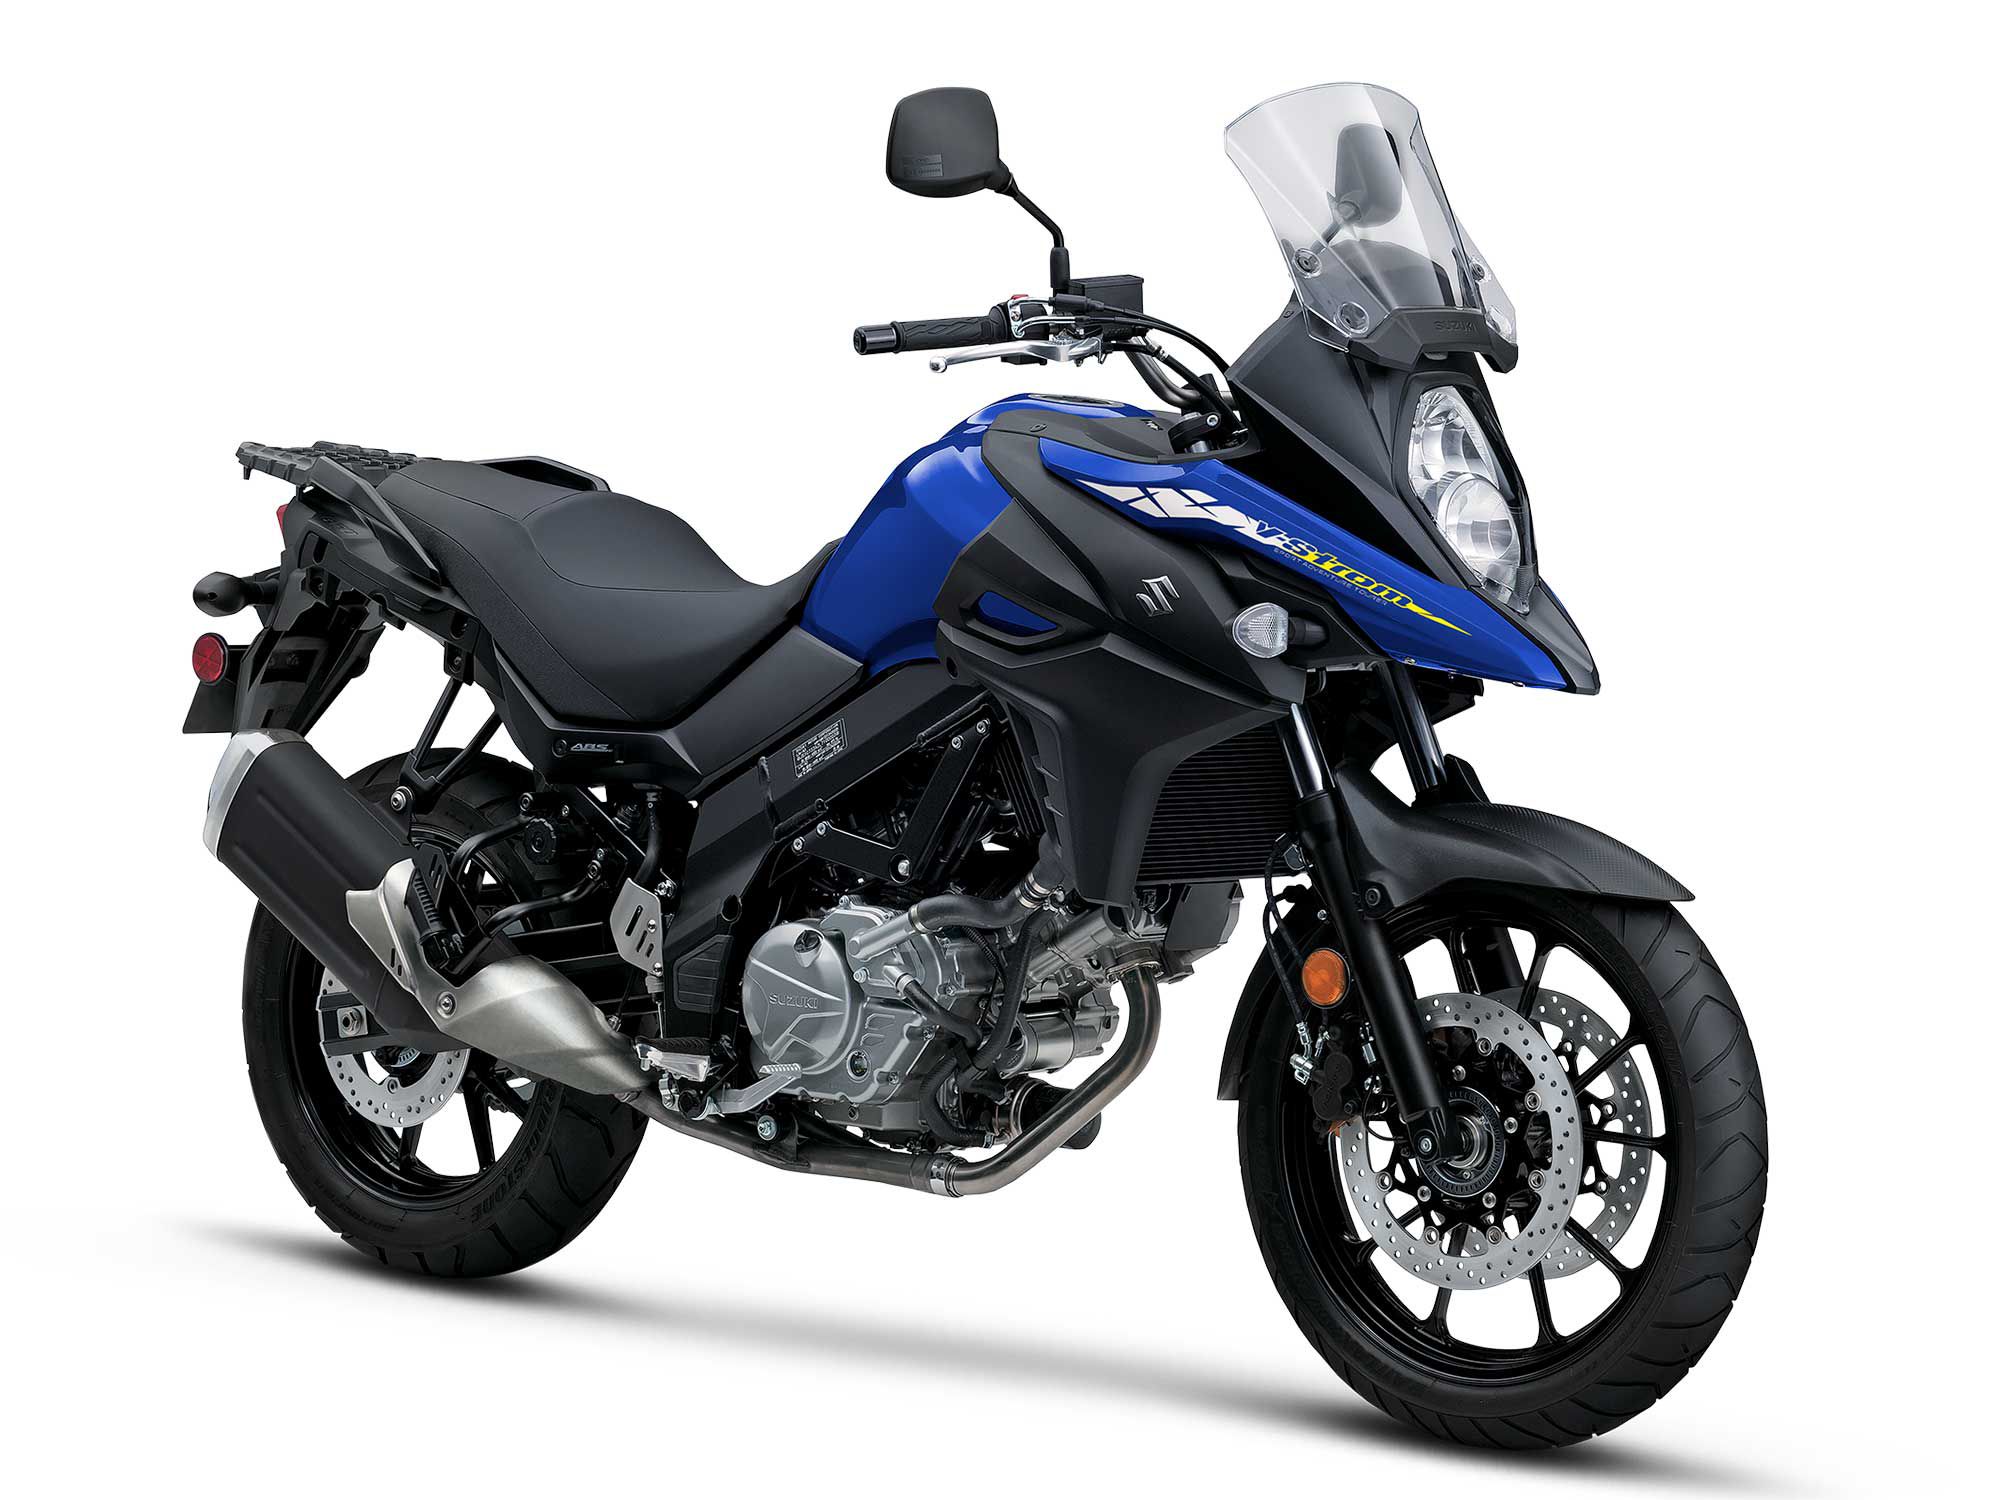 V-Strom 650 is a good example of the benefits of gentle evolution over clean-sheet redesigns.